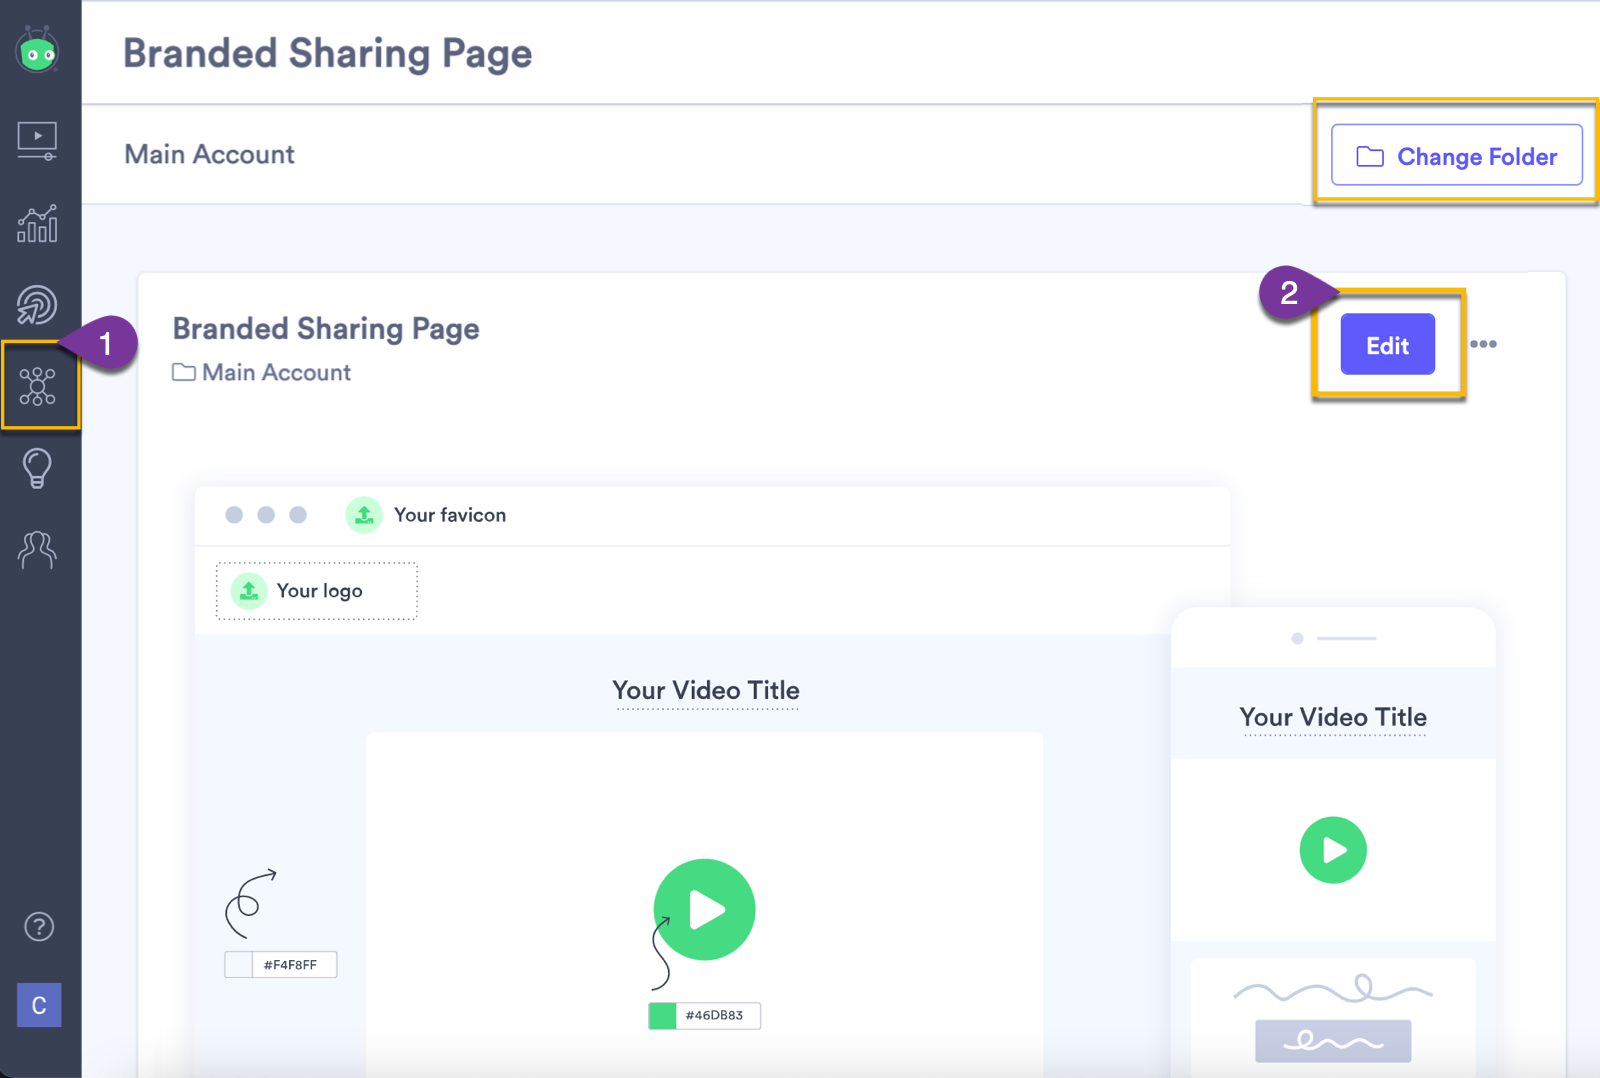 Opening the settings for a sharing page